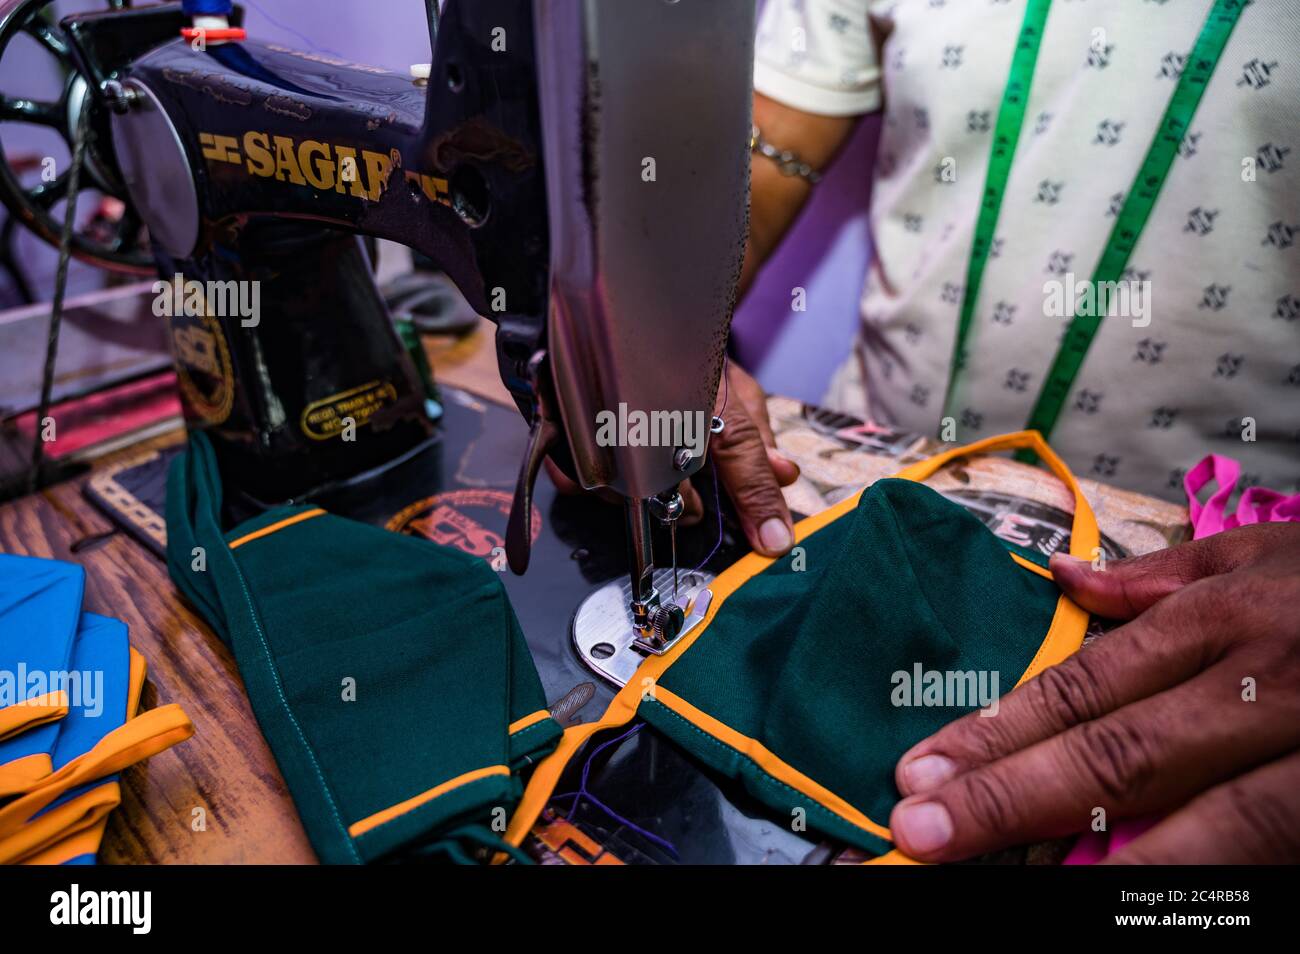 The lockdown was lifted in most places and the economy is slowly re-opening. A tailor prefers making masks than sewing cloths due to the financial cri Stock Photo